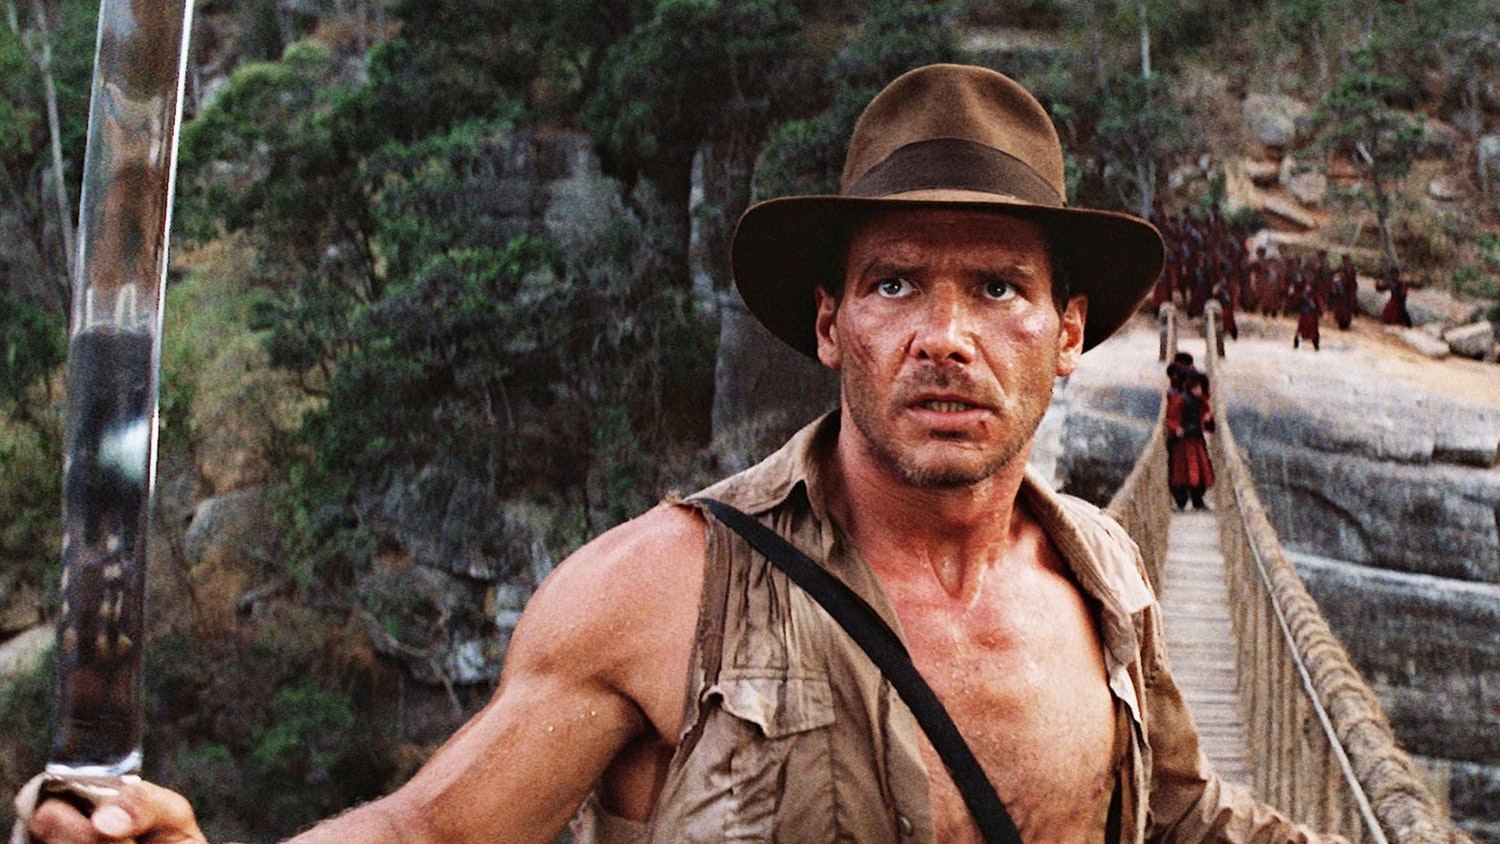 indiana jones and the temple of doom short round